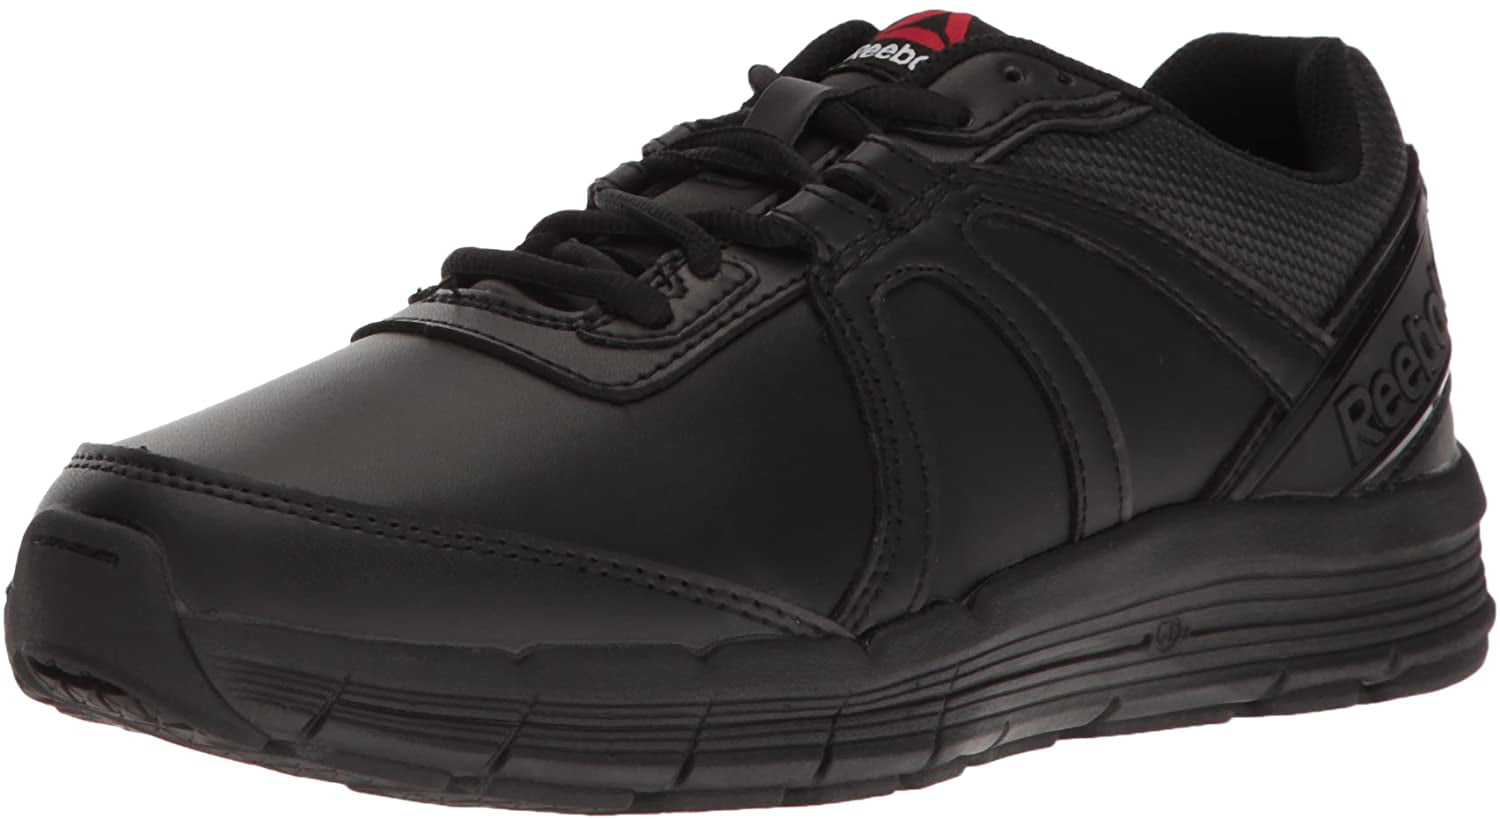 Reebok Work Men's Guide Work RB3500 Industrial and Construction Shoe ...